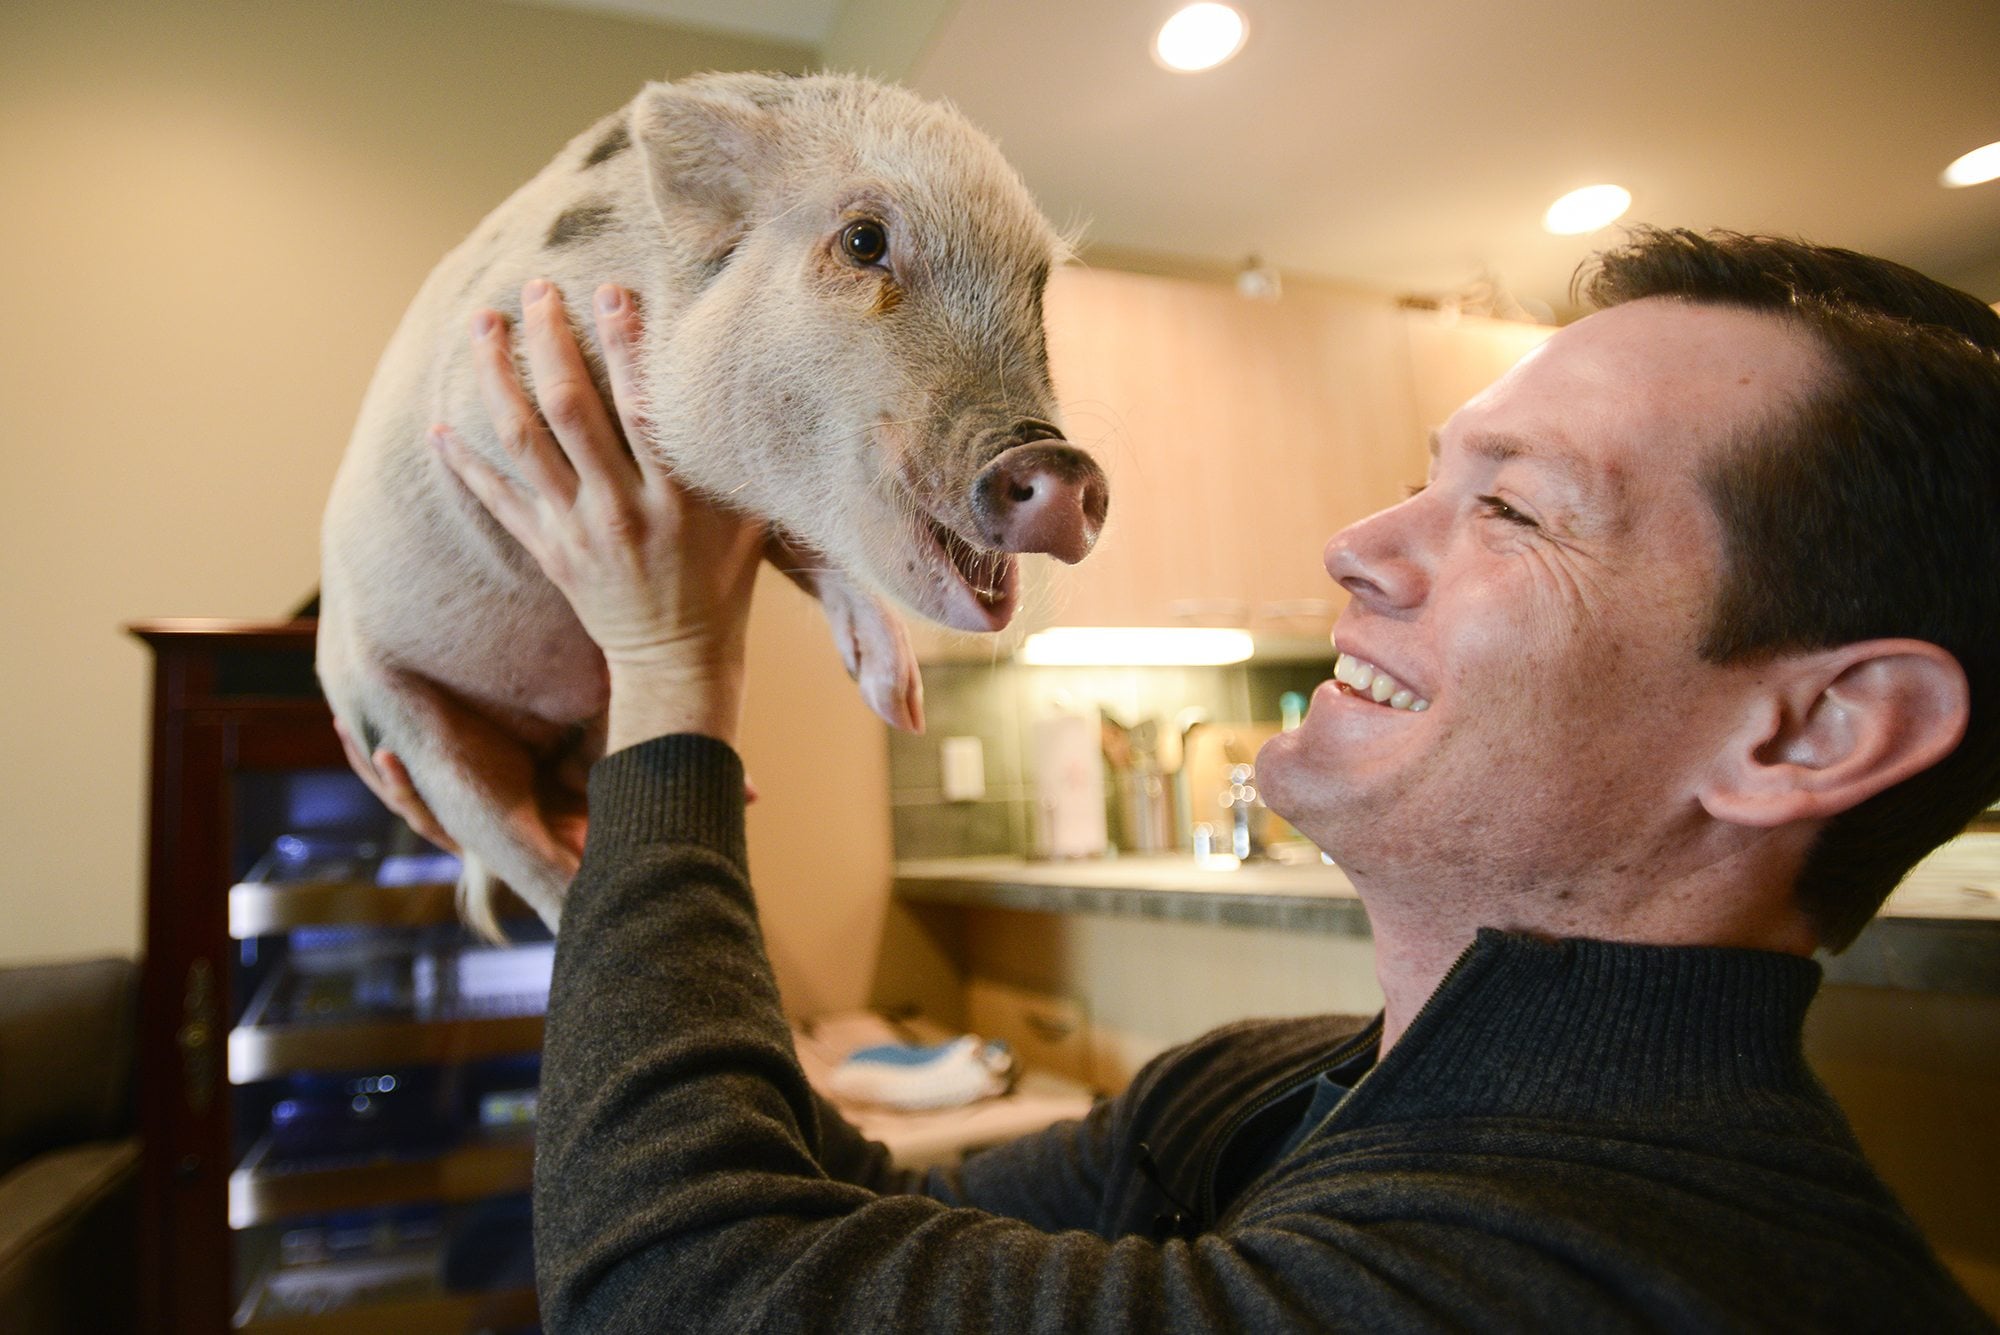 Jacob Gamble plays with his Juliana mini-pig, Ruxin, at his home Tuesday morning in downtown Vancouver. Gamble got Ruxin, a registered emotional support animal, to help ease his post-traumatic stress disorder and depression.